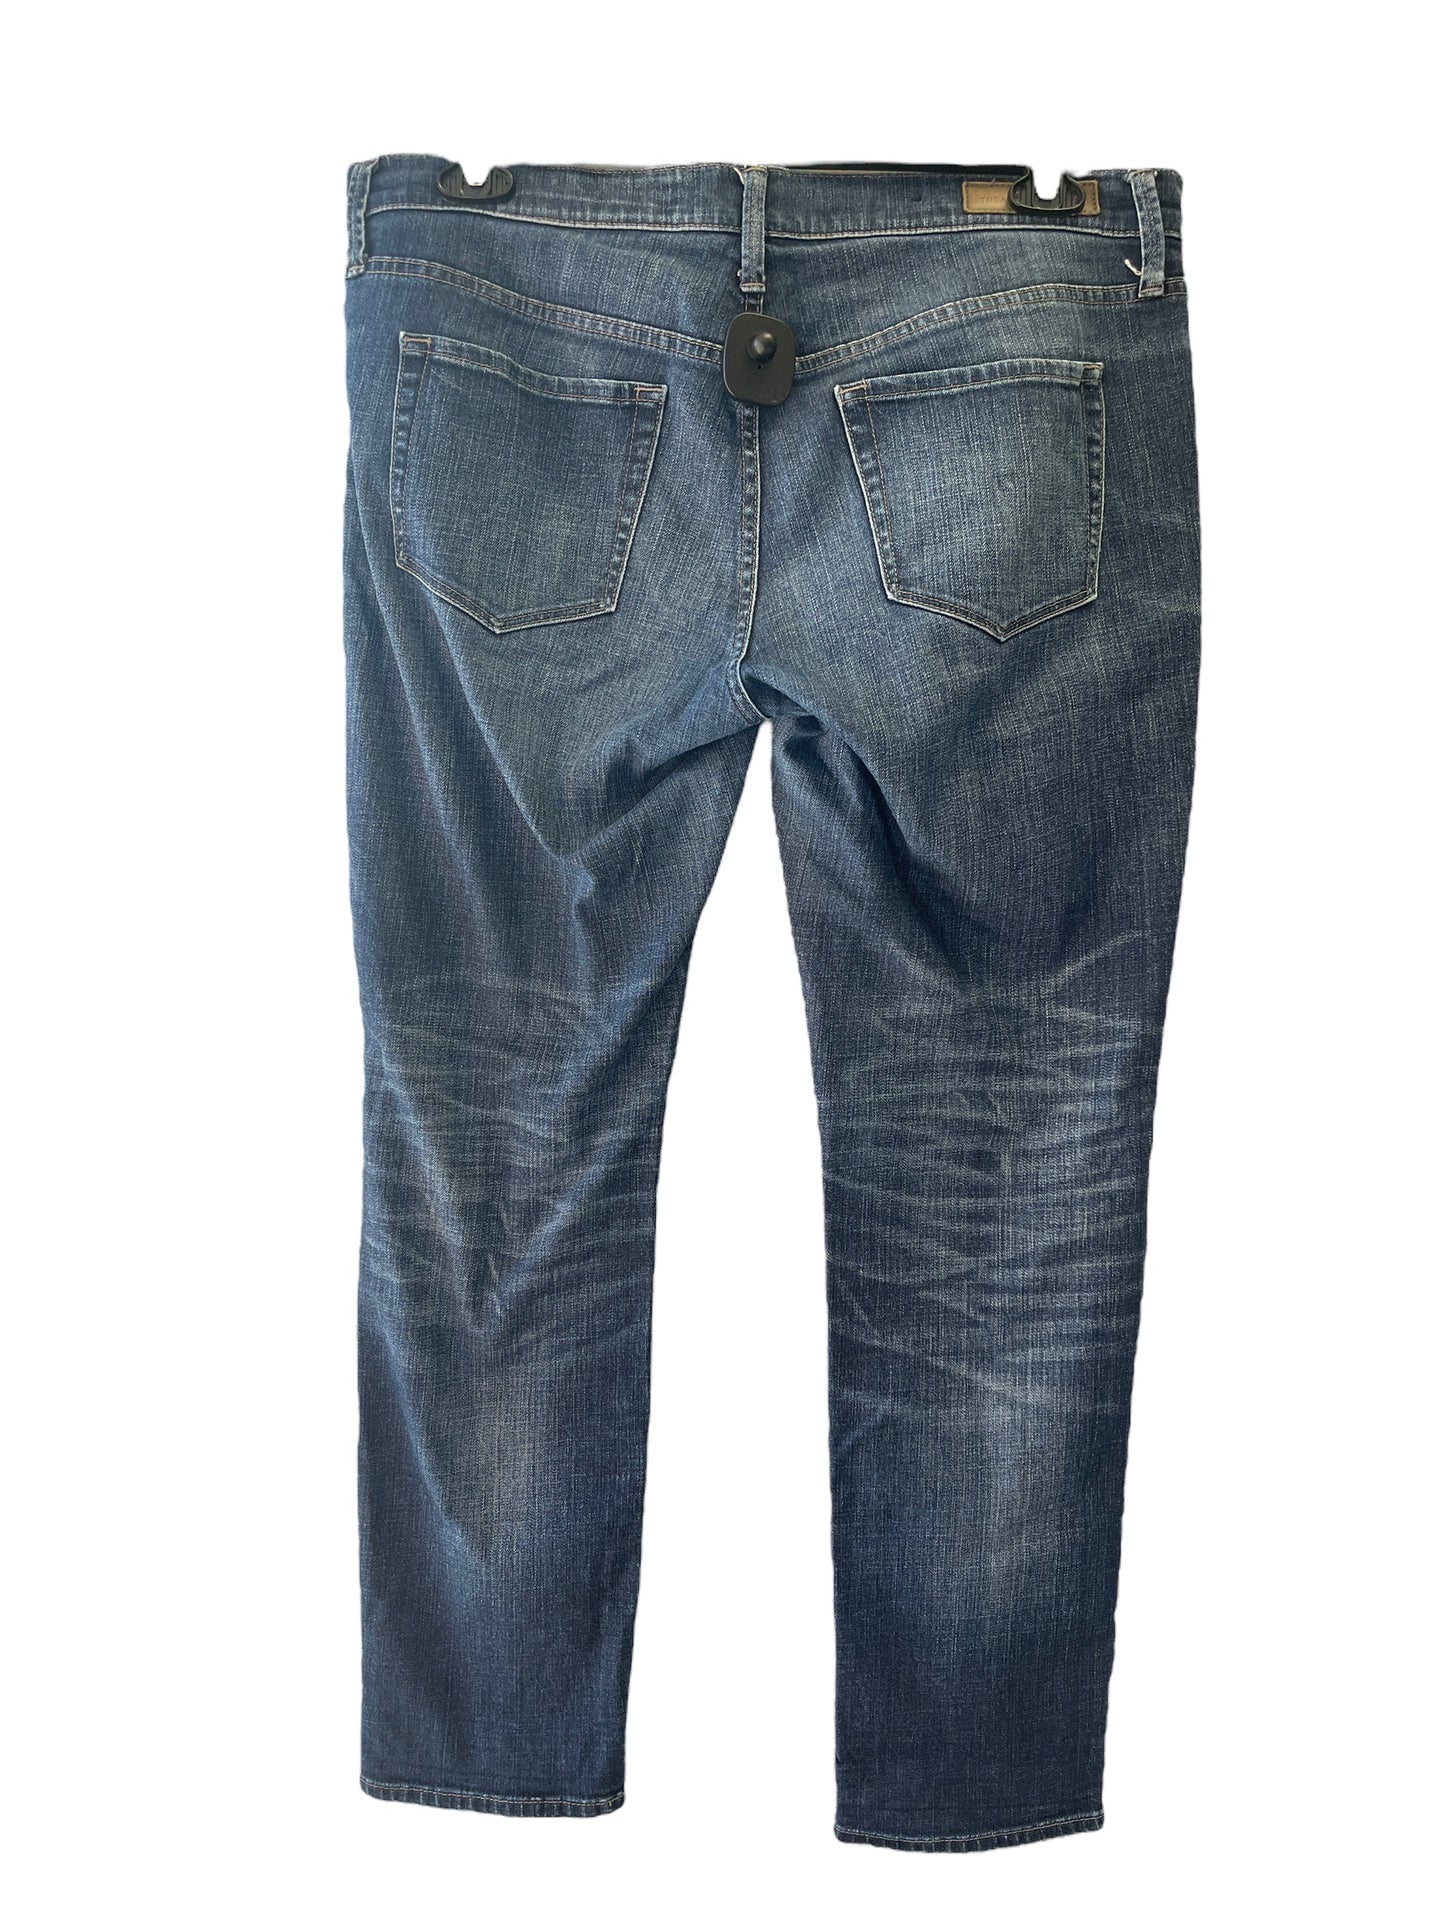 Jeans Straight By Treasure And Bond  Size: 10